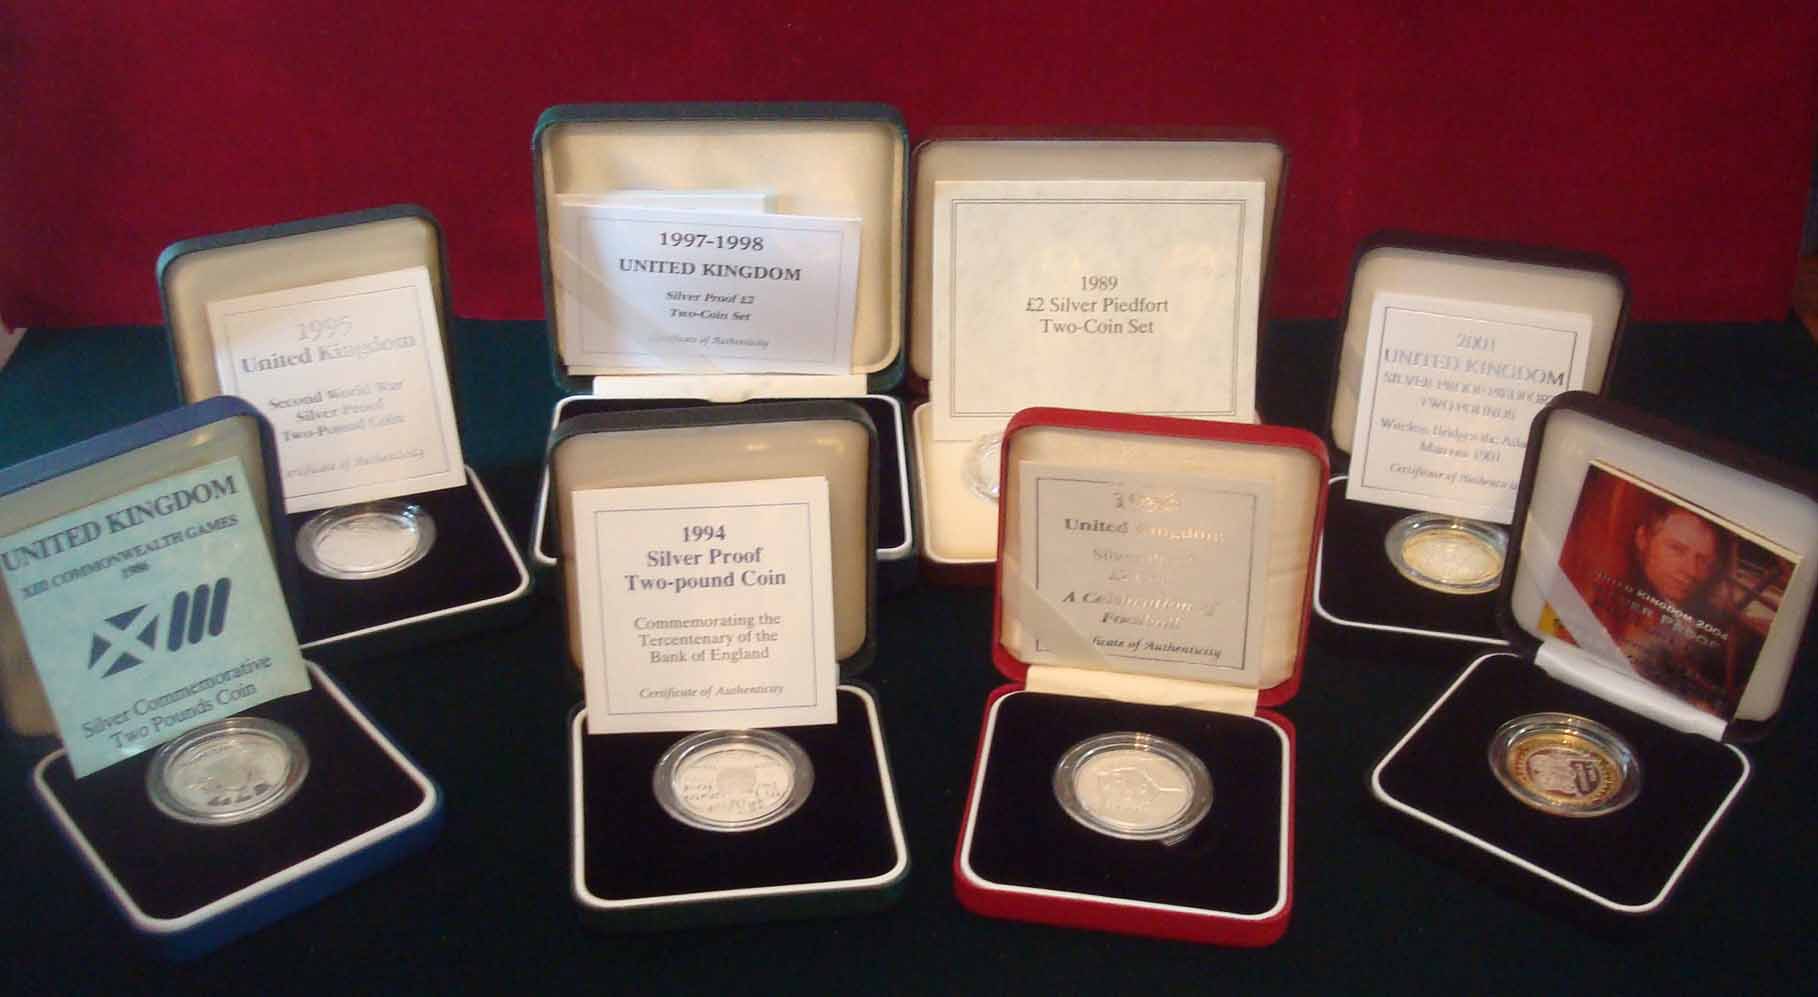 Collection of Silver Proof Two Pound Coins: To consist of 1986 Commonwealth Games, 1989 2 Coin